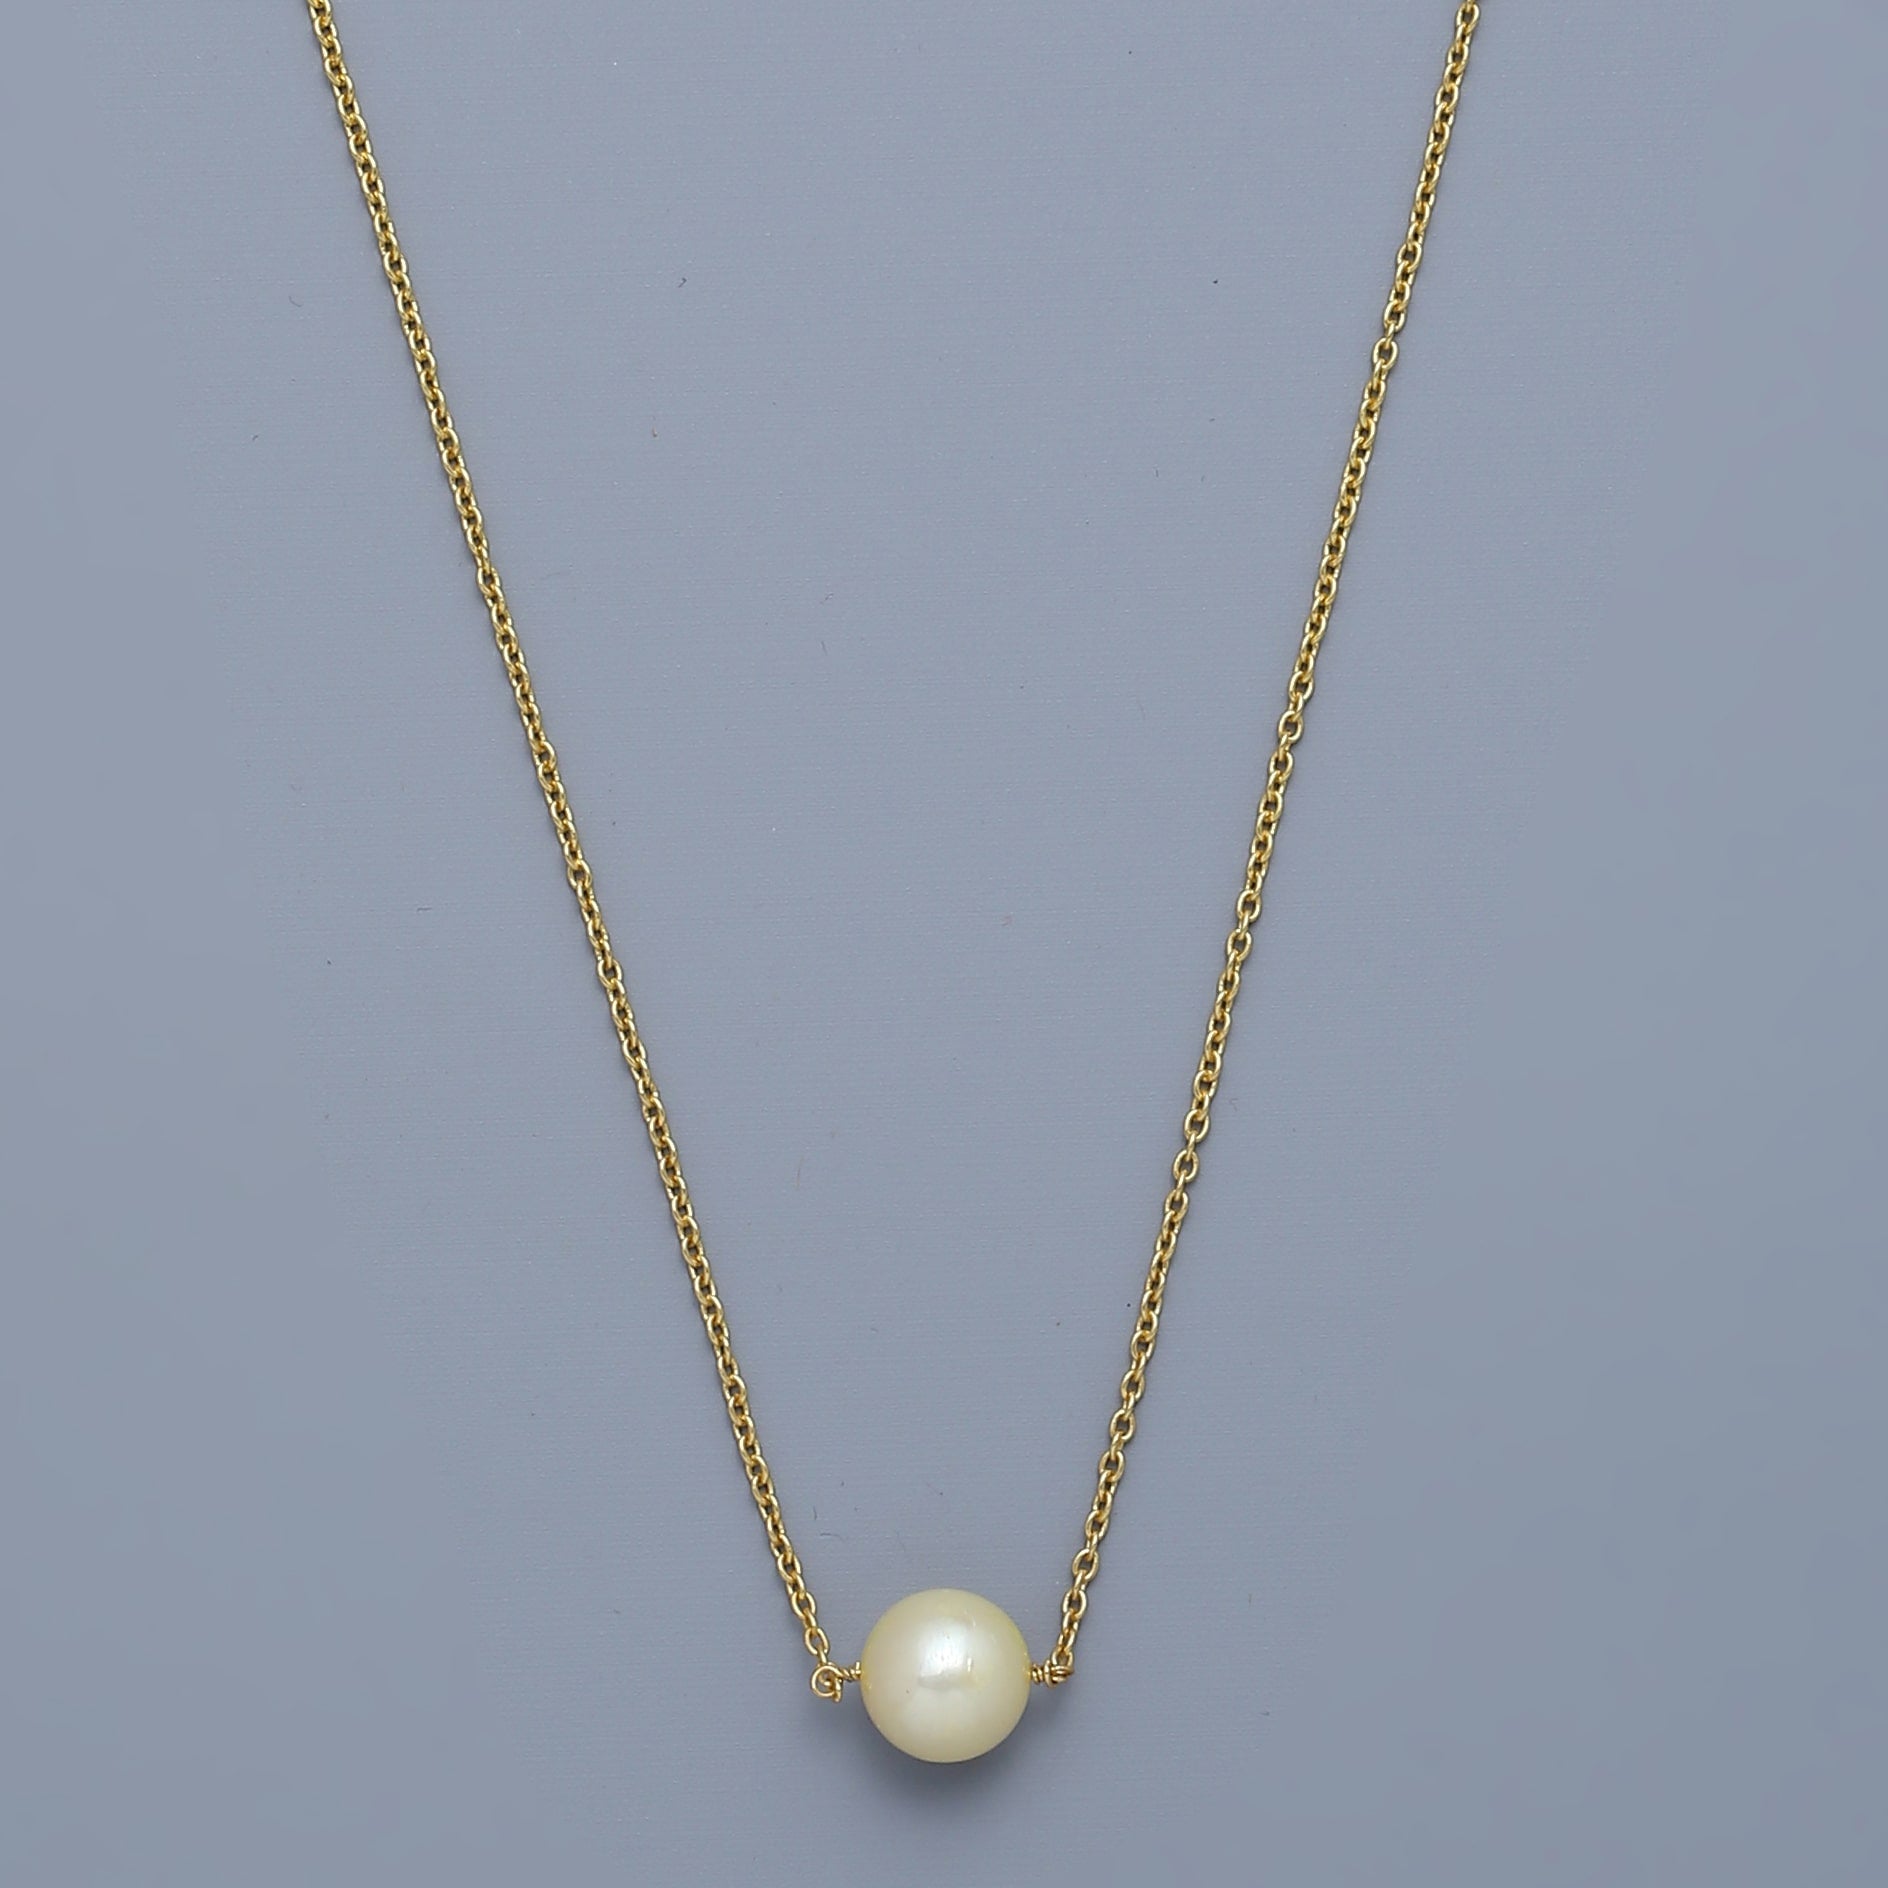 9K White Gold Pearl Pendant Necklace for Women and Girls, Cute Dainty 9ct  White Gold Freshwater Pearl Necklace, Pearl Drop Pendant Necklace - Etsy